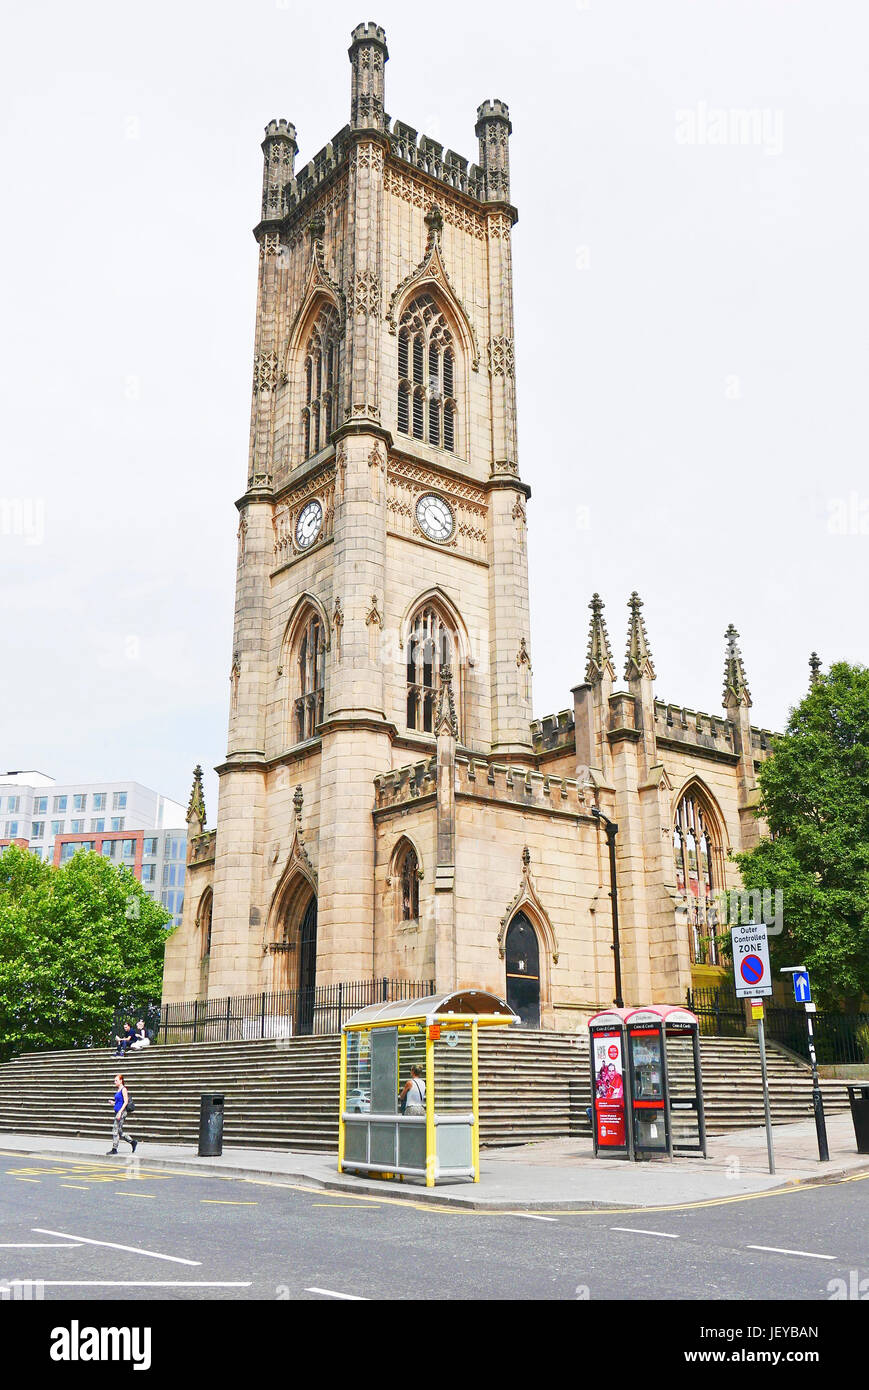 Former Anglican Parish Church of St Luke's partly destroyed in the blitz of 1941 known now as the 'bombed out church',Leese Street,Liverpool,UK Stock Photo